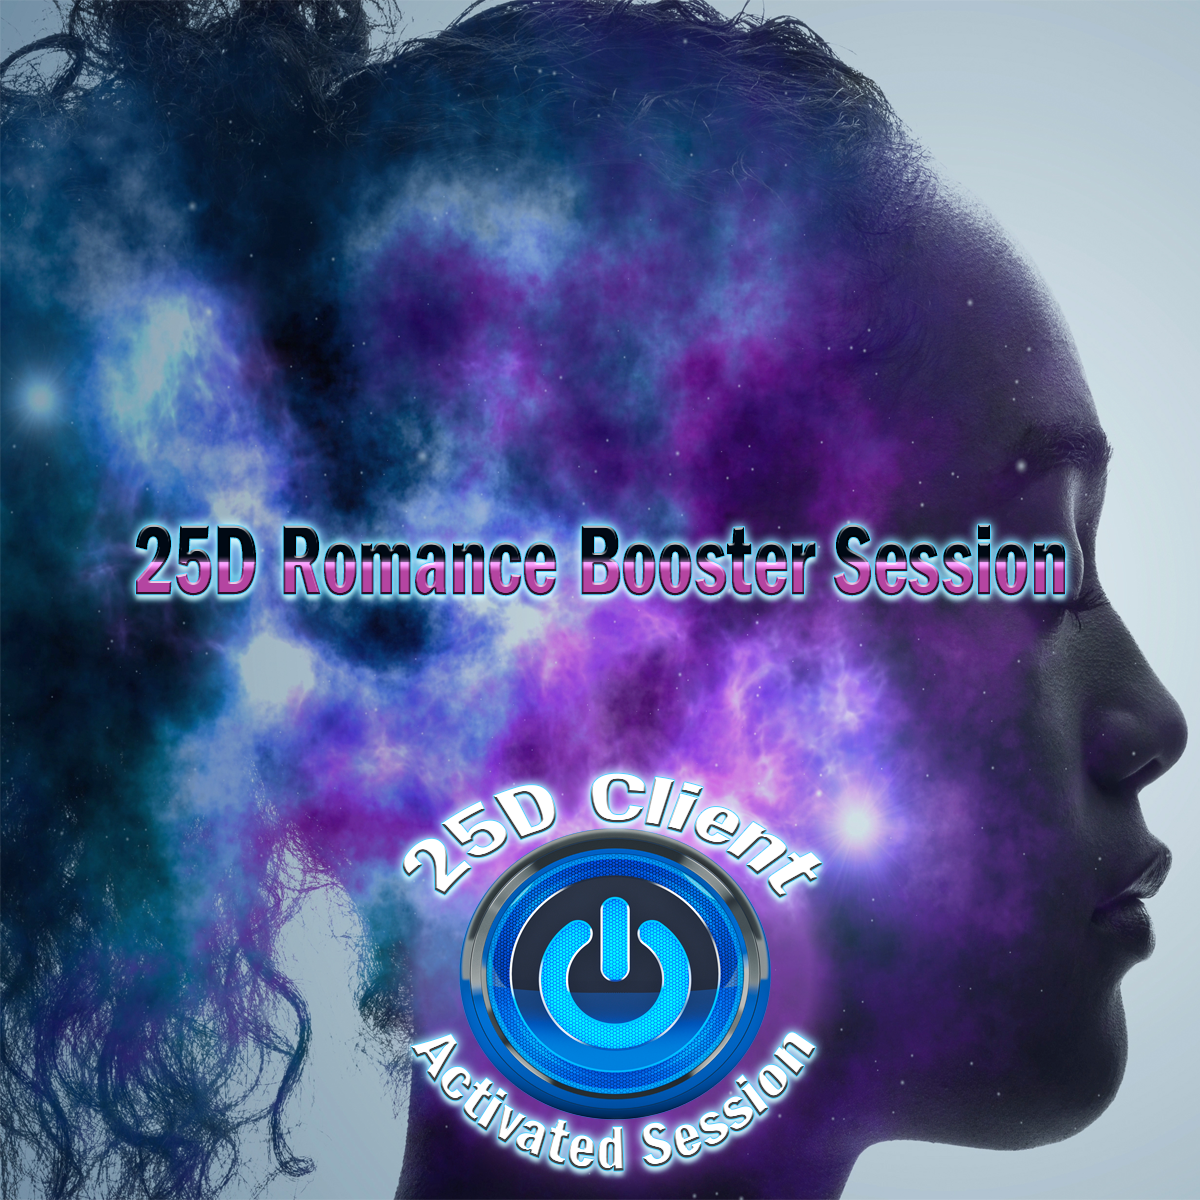 25d-client-activated-session-romance-booster